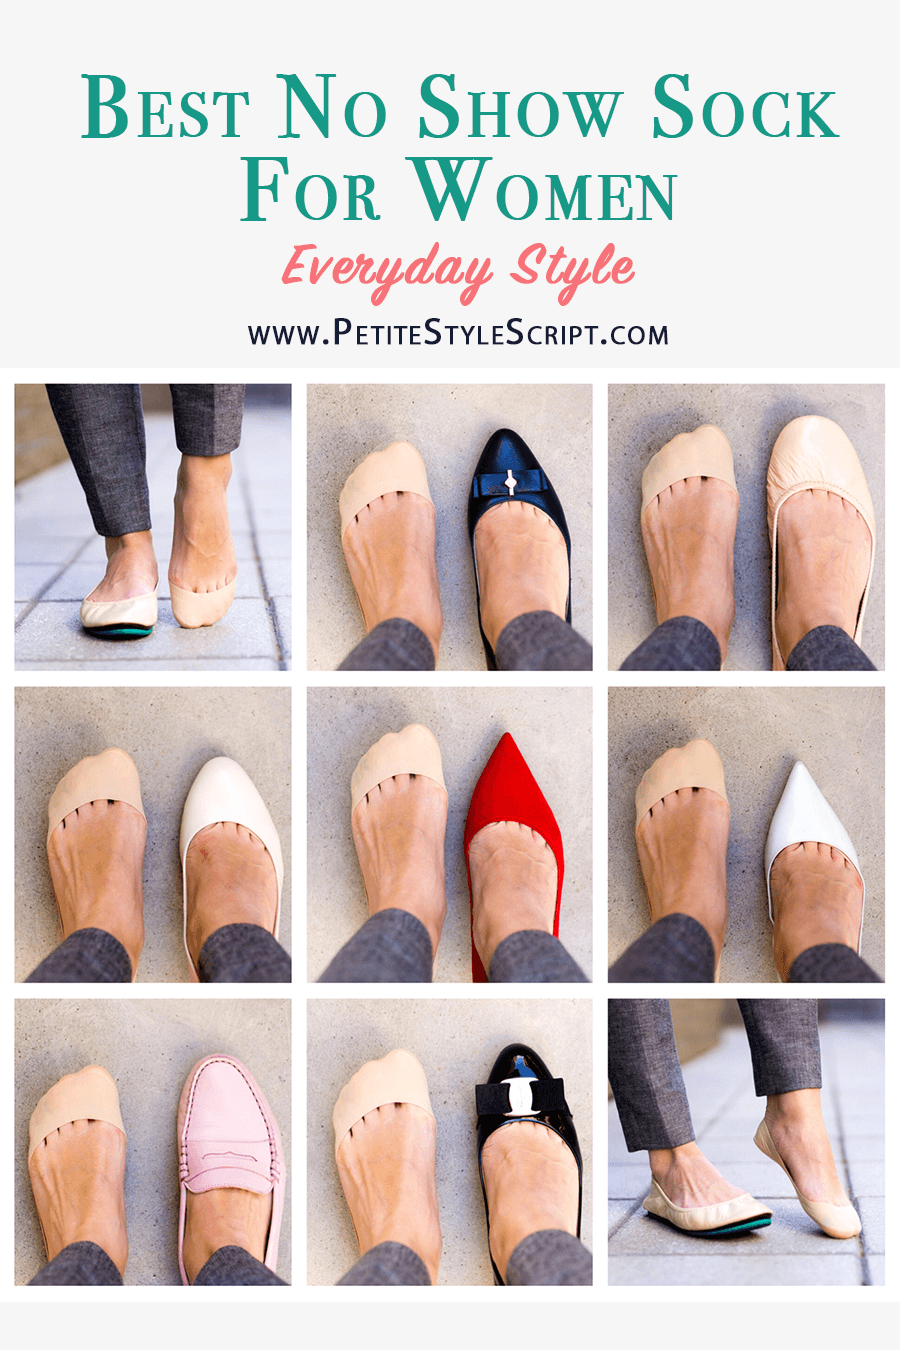 Best No Show Sock for Women | Sheec Solehugger Secret 2.0 review | Kickstarter campaign | Sock for ballet flats | Tieks ballet flats review | Sock for high heels & pumps | Salvatore Ferragamo bow heels | M. Gemi heels | Cole Haan bow heels | Michael Kors ivory pump | M.Gemi Pastoso loafer review | Silicone grip to prevent slippage | #BeChicWearSheec